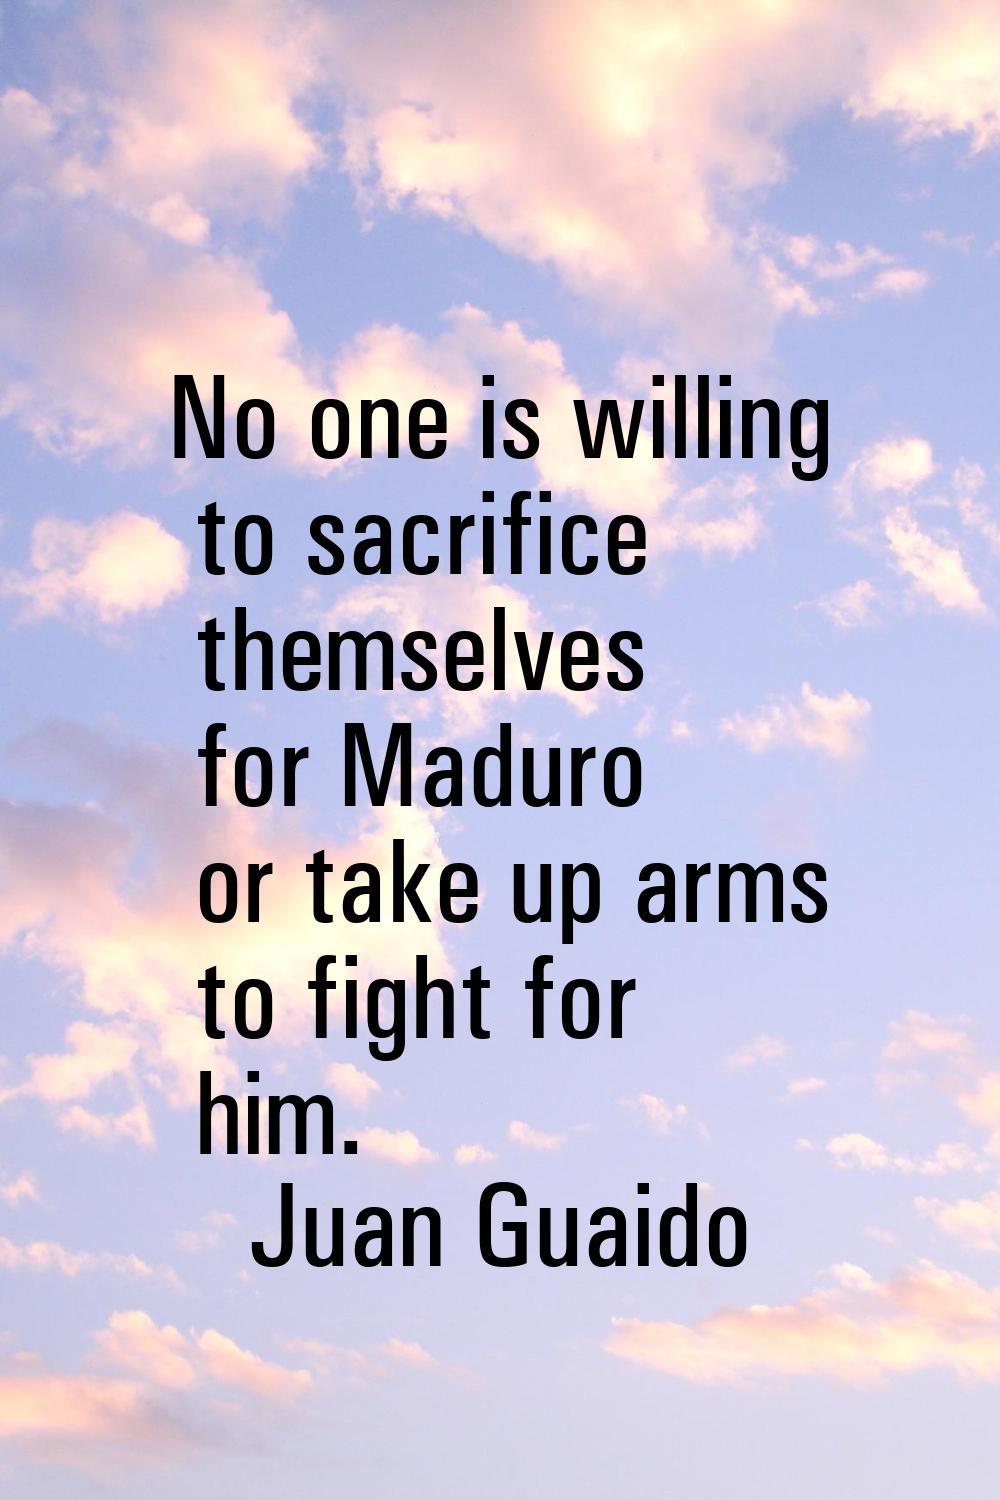 No one is willing to sacrifice themselves for Maduro or take up arms to fight for him.